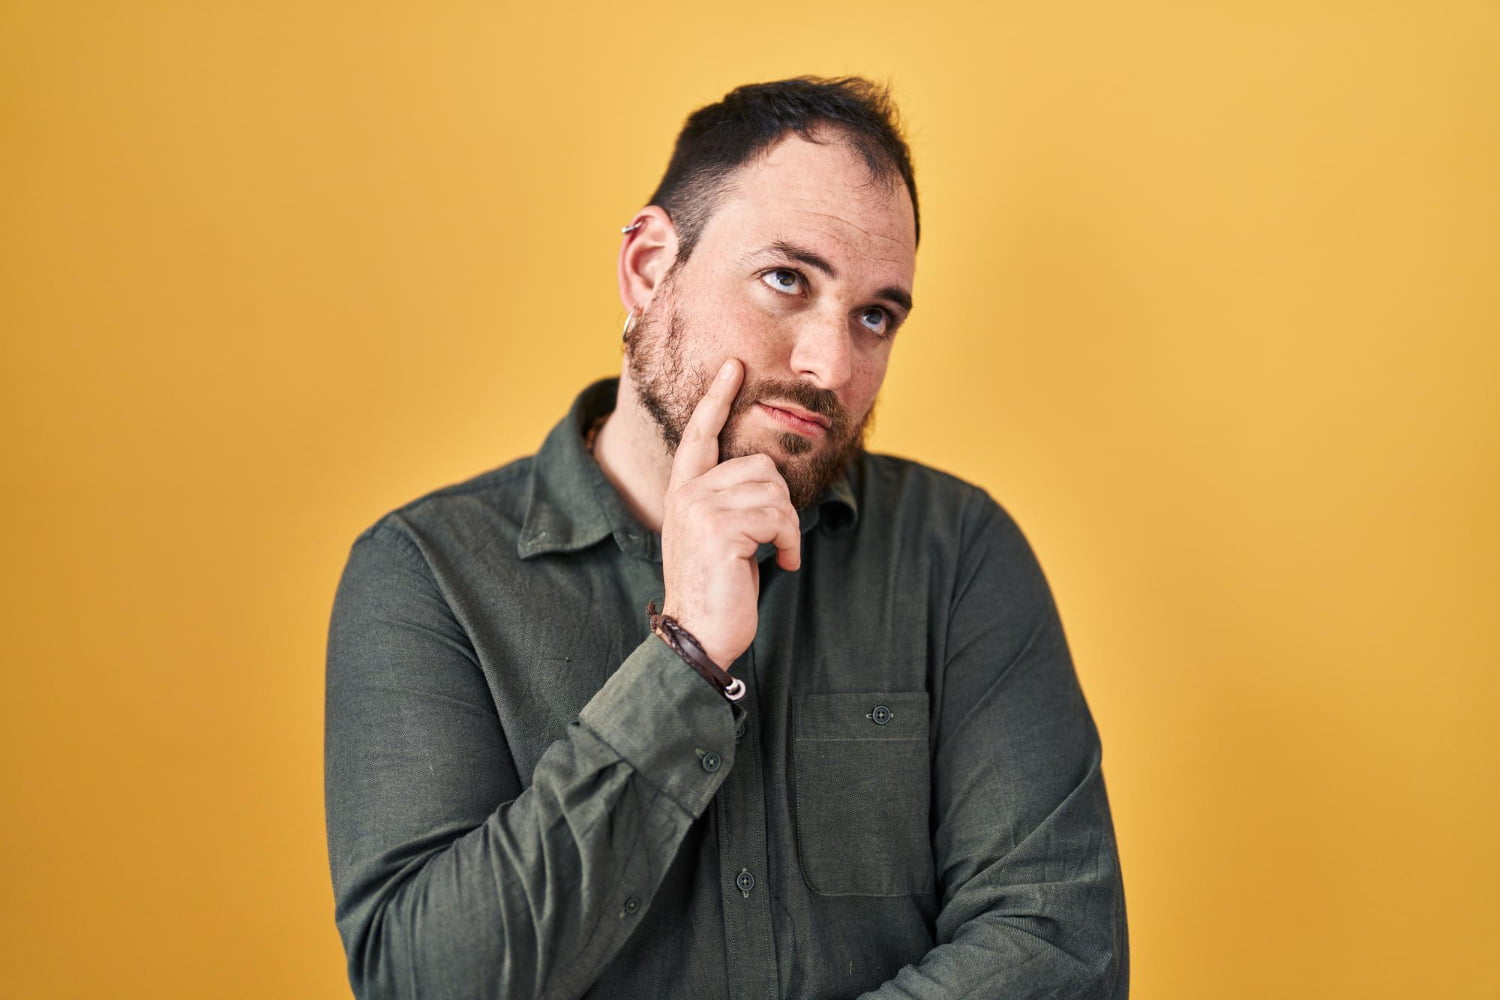 plus size hispanic man with beard standing yellow background with hand chin thinking about question pensive expression smiling with thoughtful face doubt concept